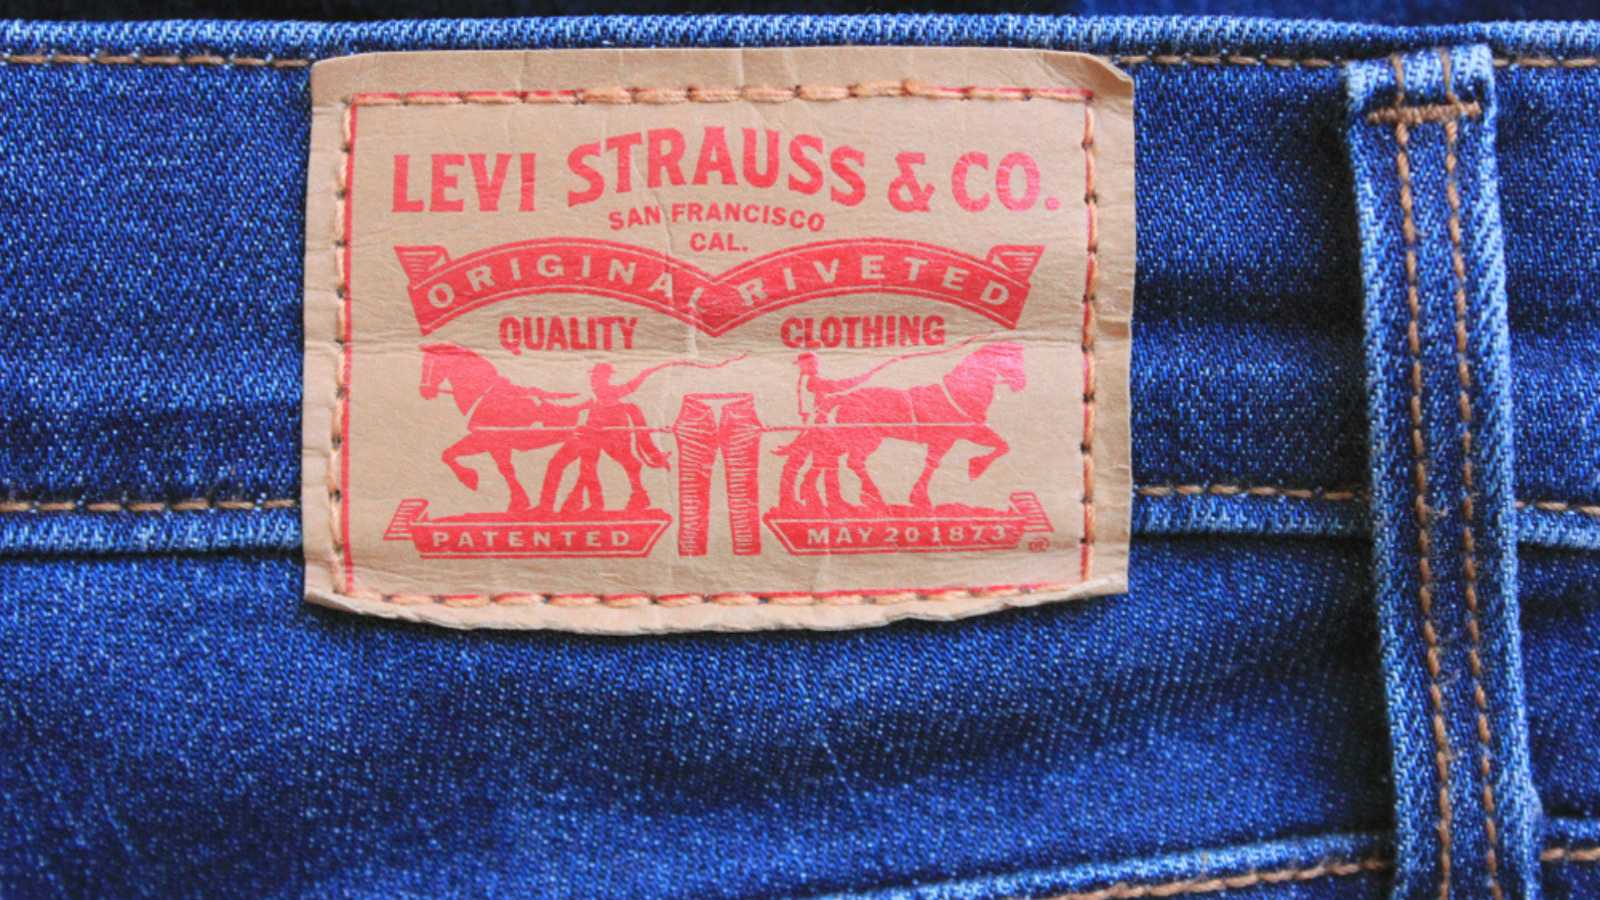 MOSCOW, RUSSIA - FEBRUARY 17, 2019: Levi's Denim Jeans Model with Leather Brand Label. Levi Strauss is an American Clothing Company, Selling Classic Vintage Denim Textured Jeans. Levis Jeans Top View